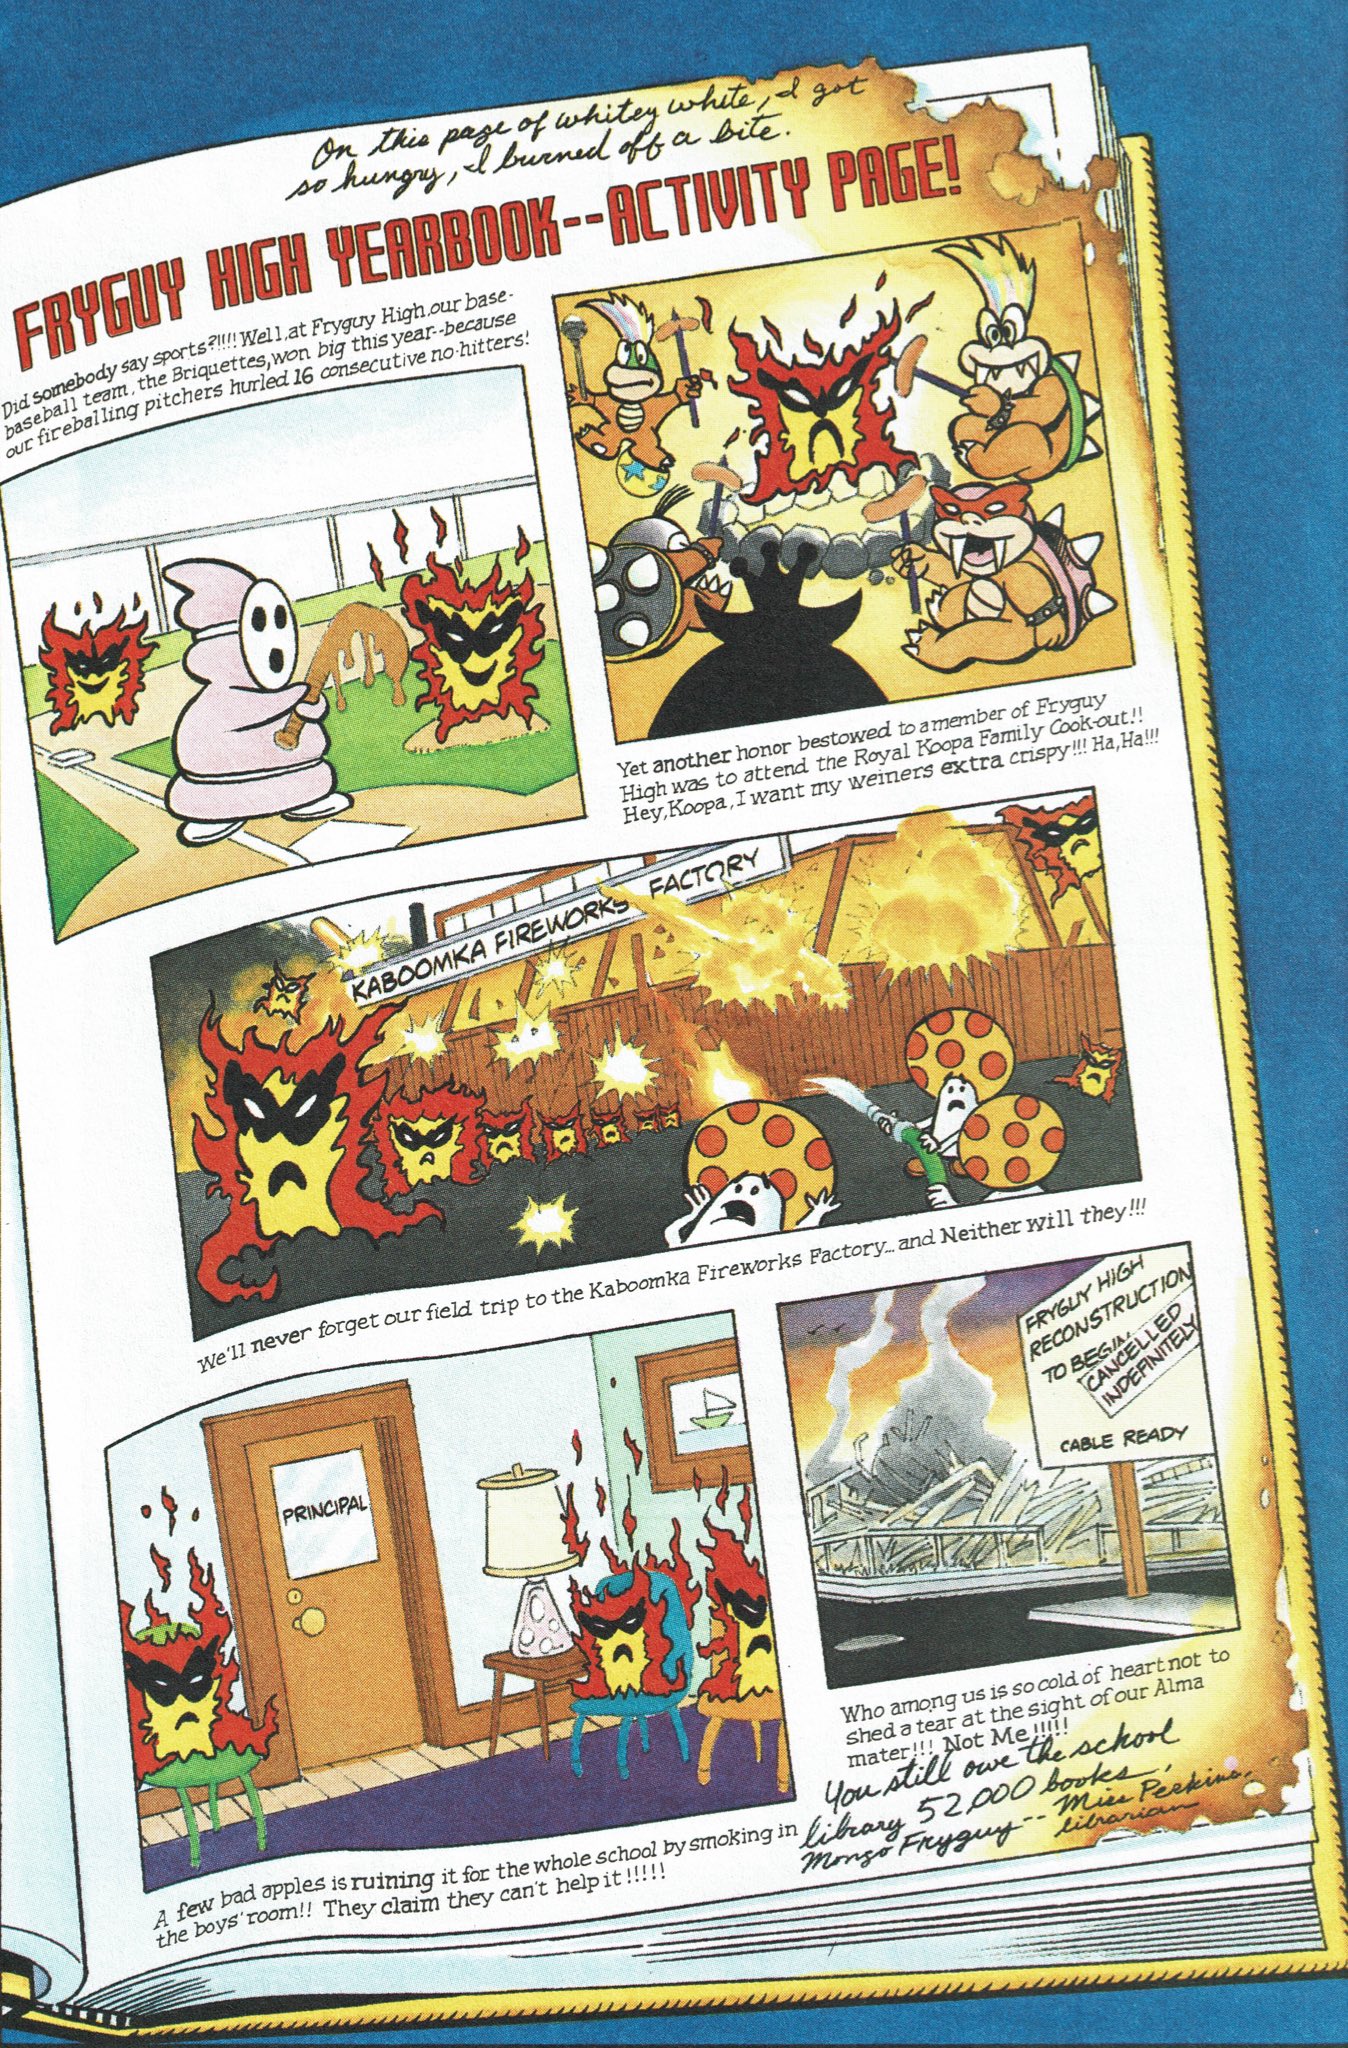 fryguy-high-yearbook-activity-page-super-mario-wiki-the-mario